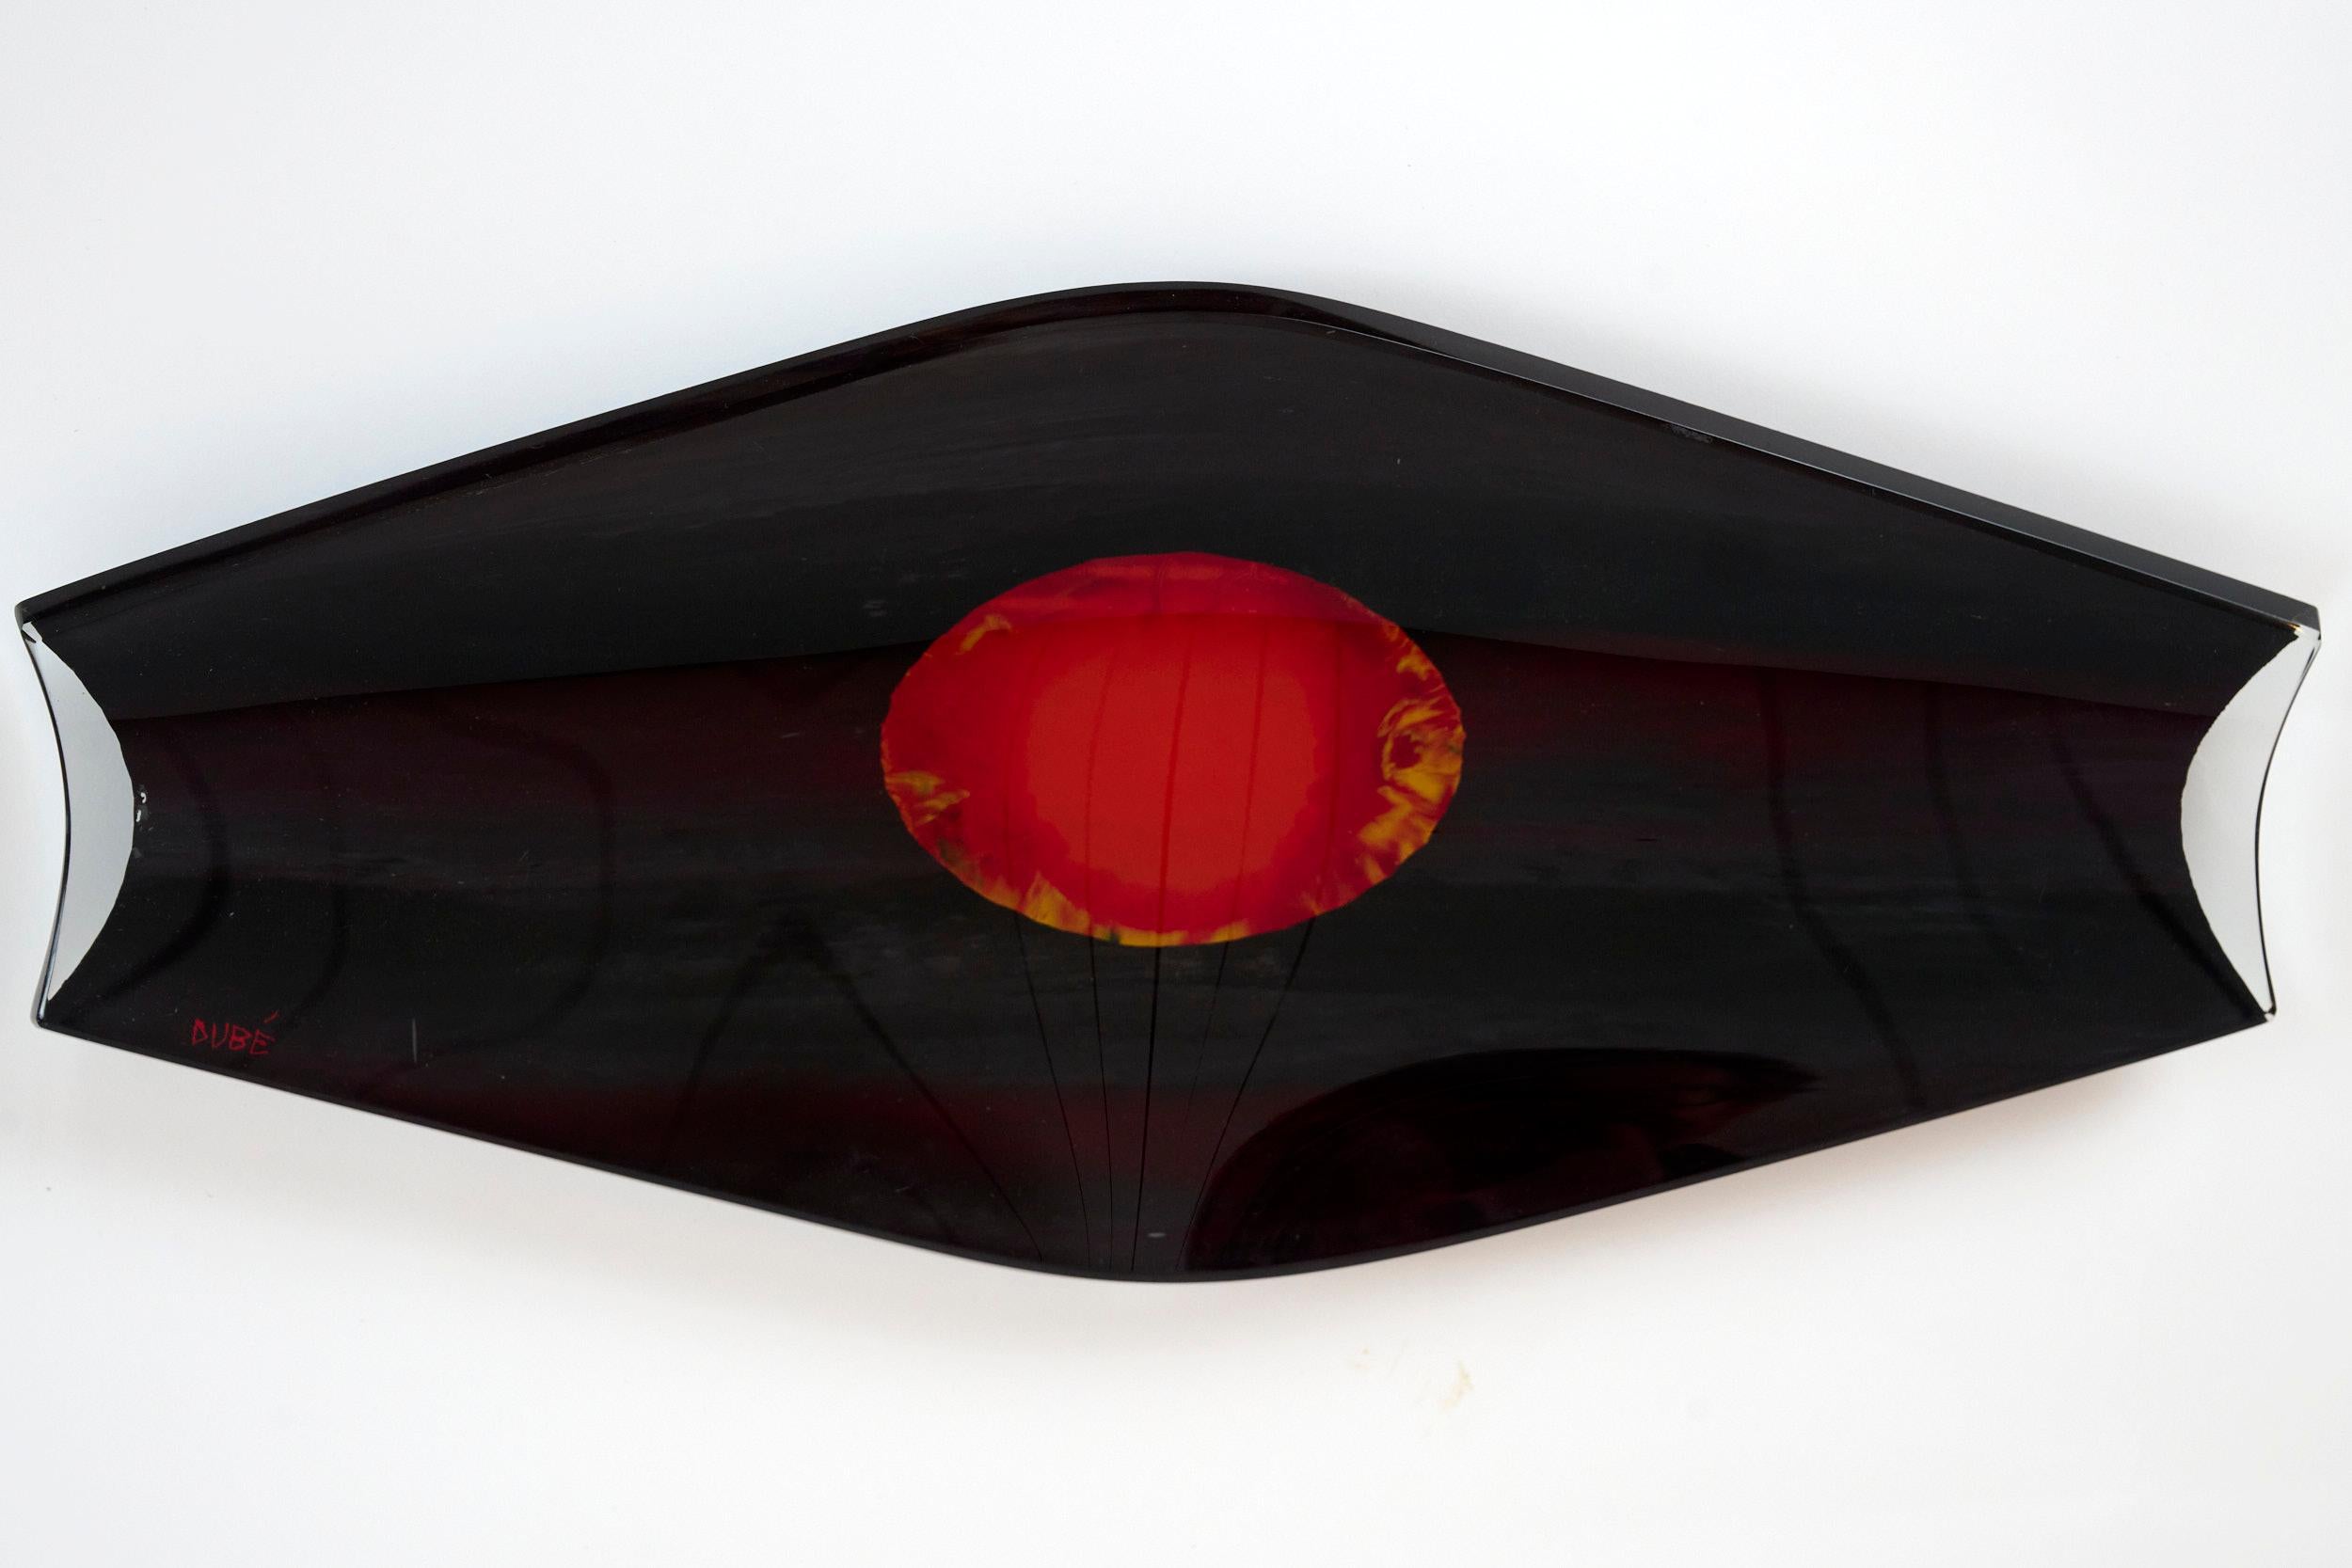 Glass dish by Duilio (Dube´) Barnabé

Reverse painted and bevelled glass

Produced by Fontana Arte
Italy c 1956.